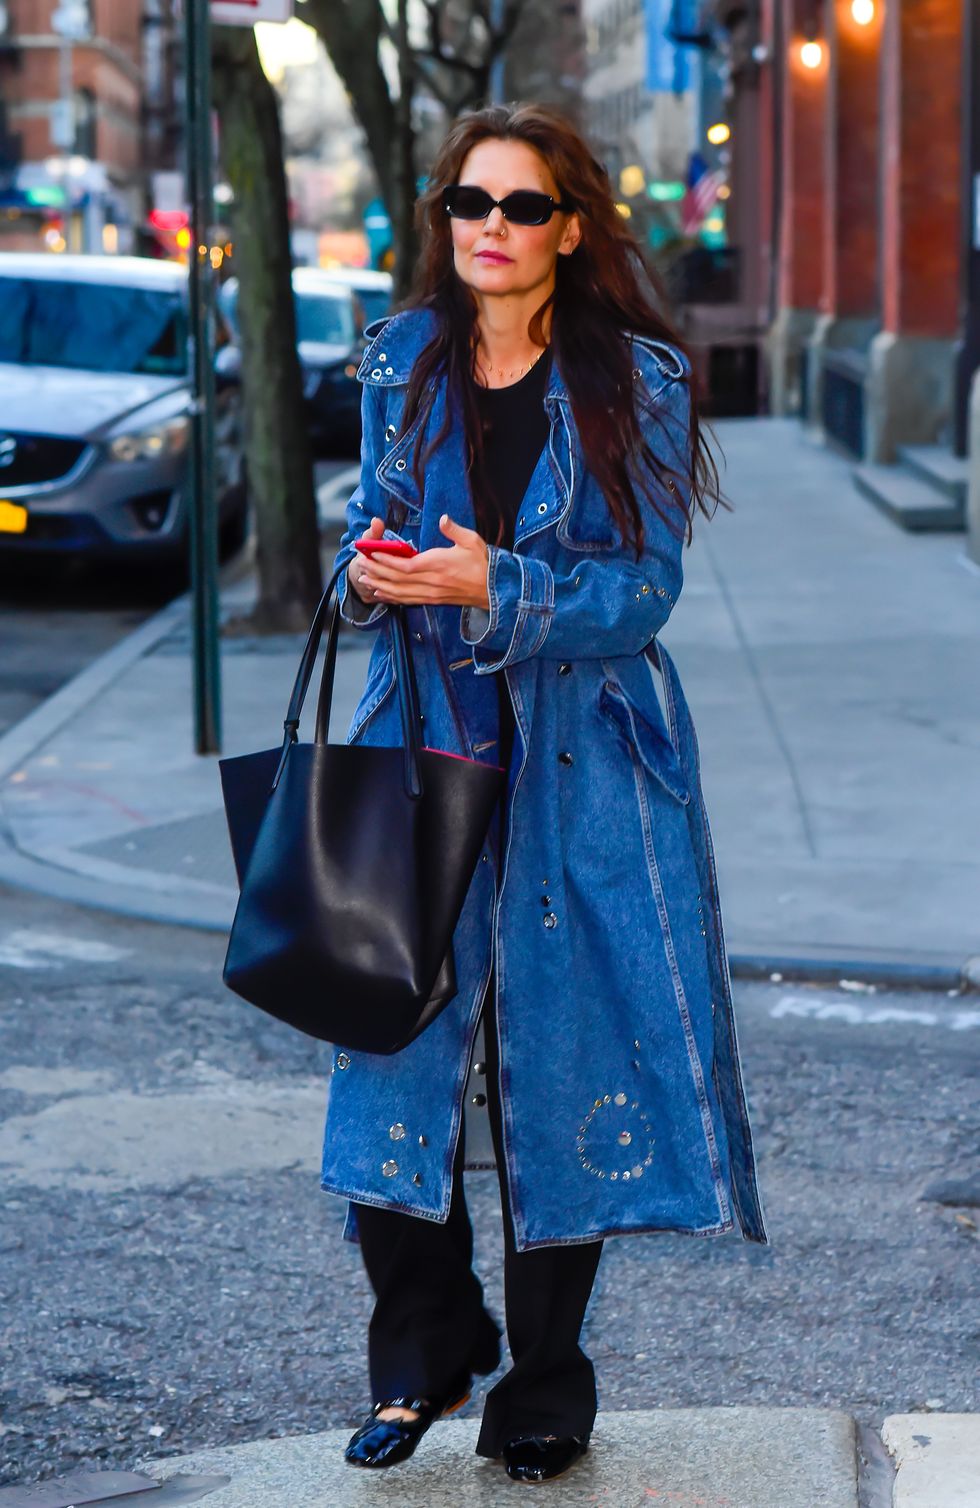 Katie Holmes’s Studded Denim Trench Coat Is Why This Outfit Works